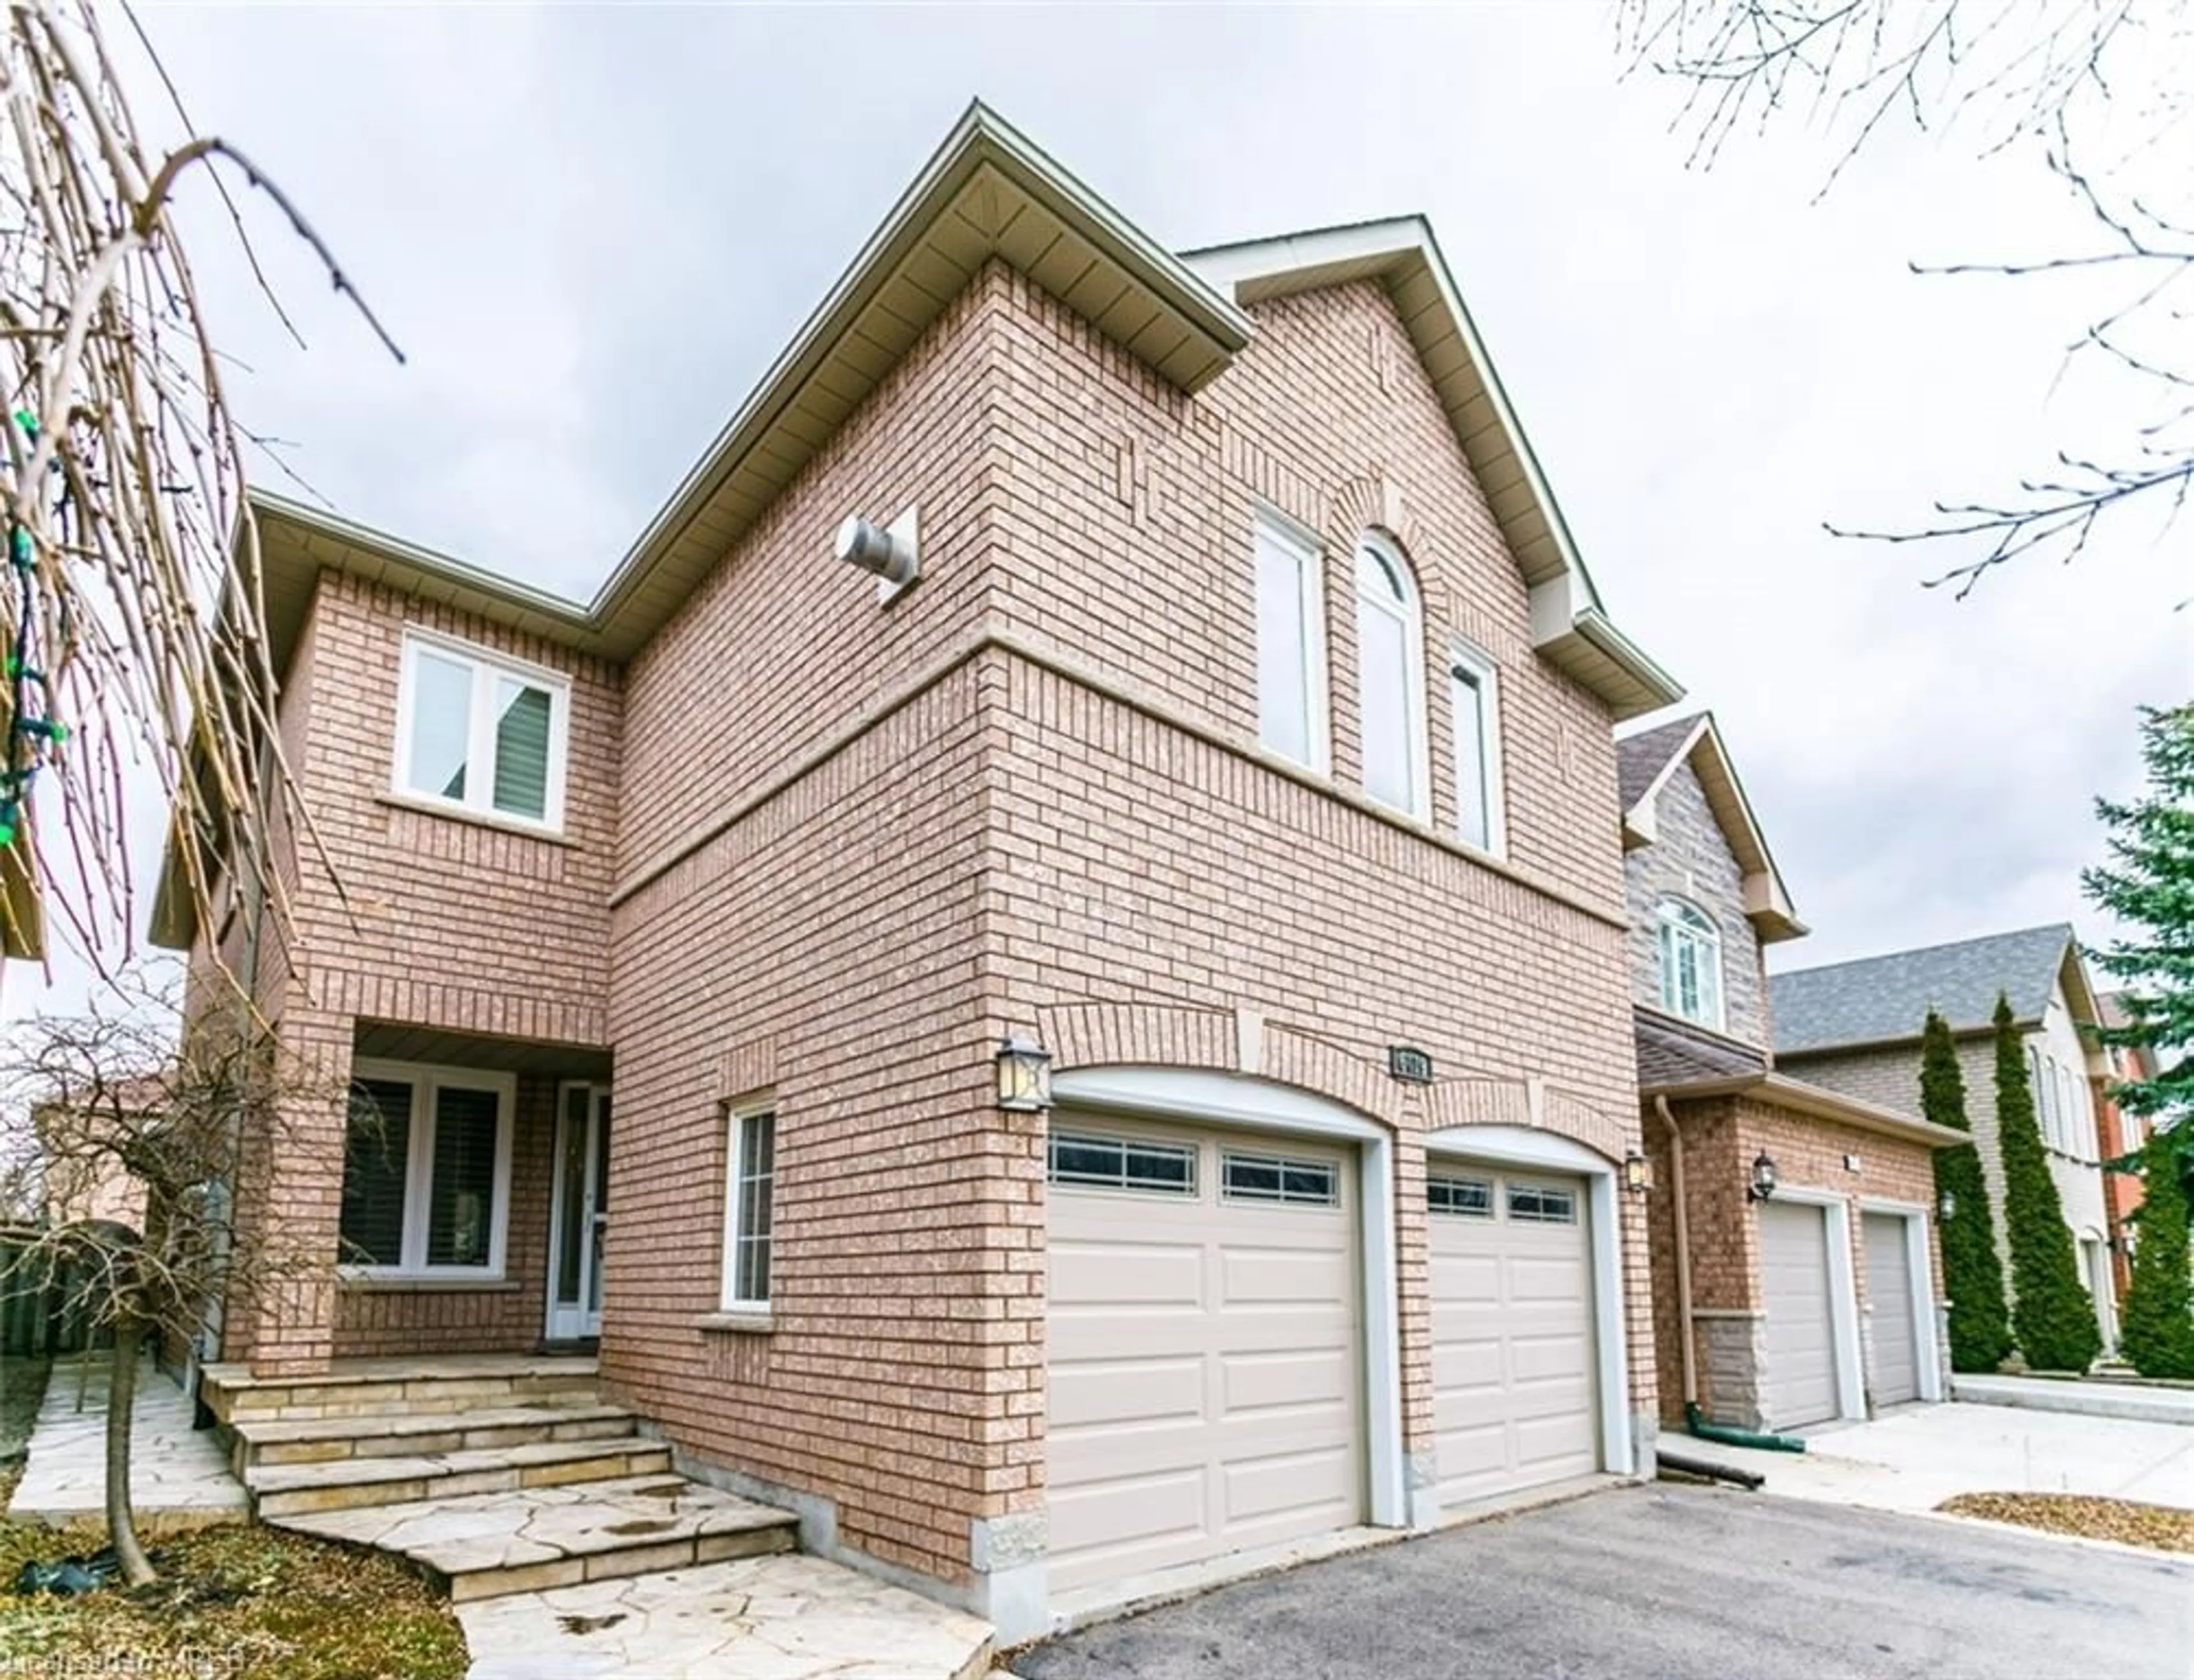 Home with brick exterior material for 6419 Hampden Woods Rd, Mississauga Ontario L5N 7V3